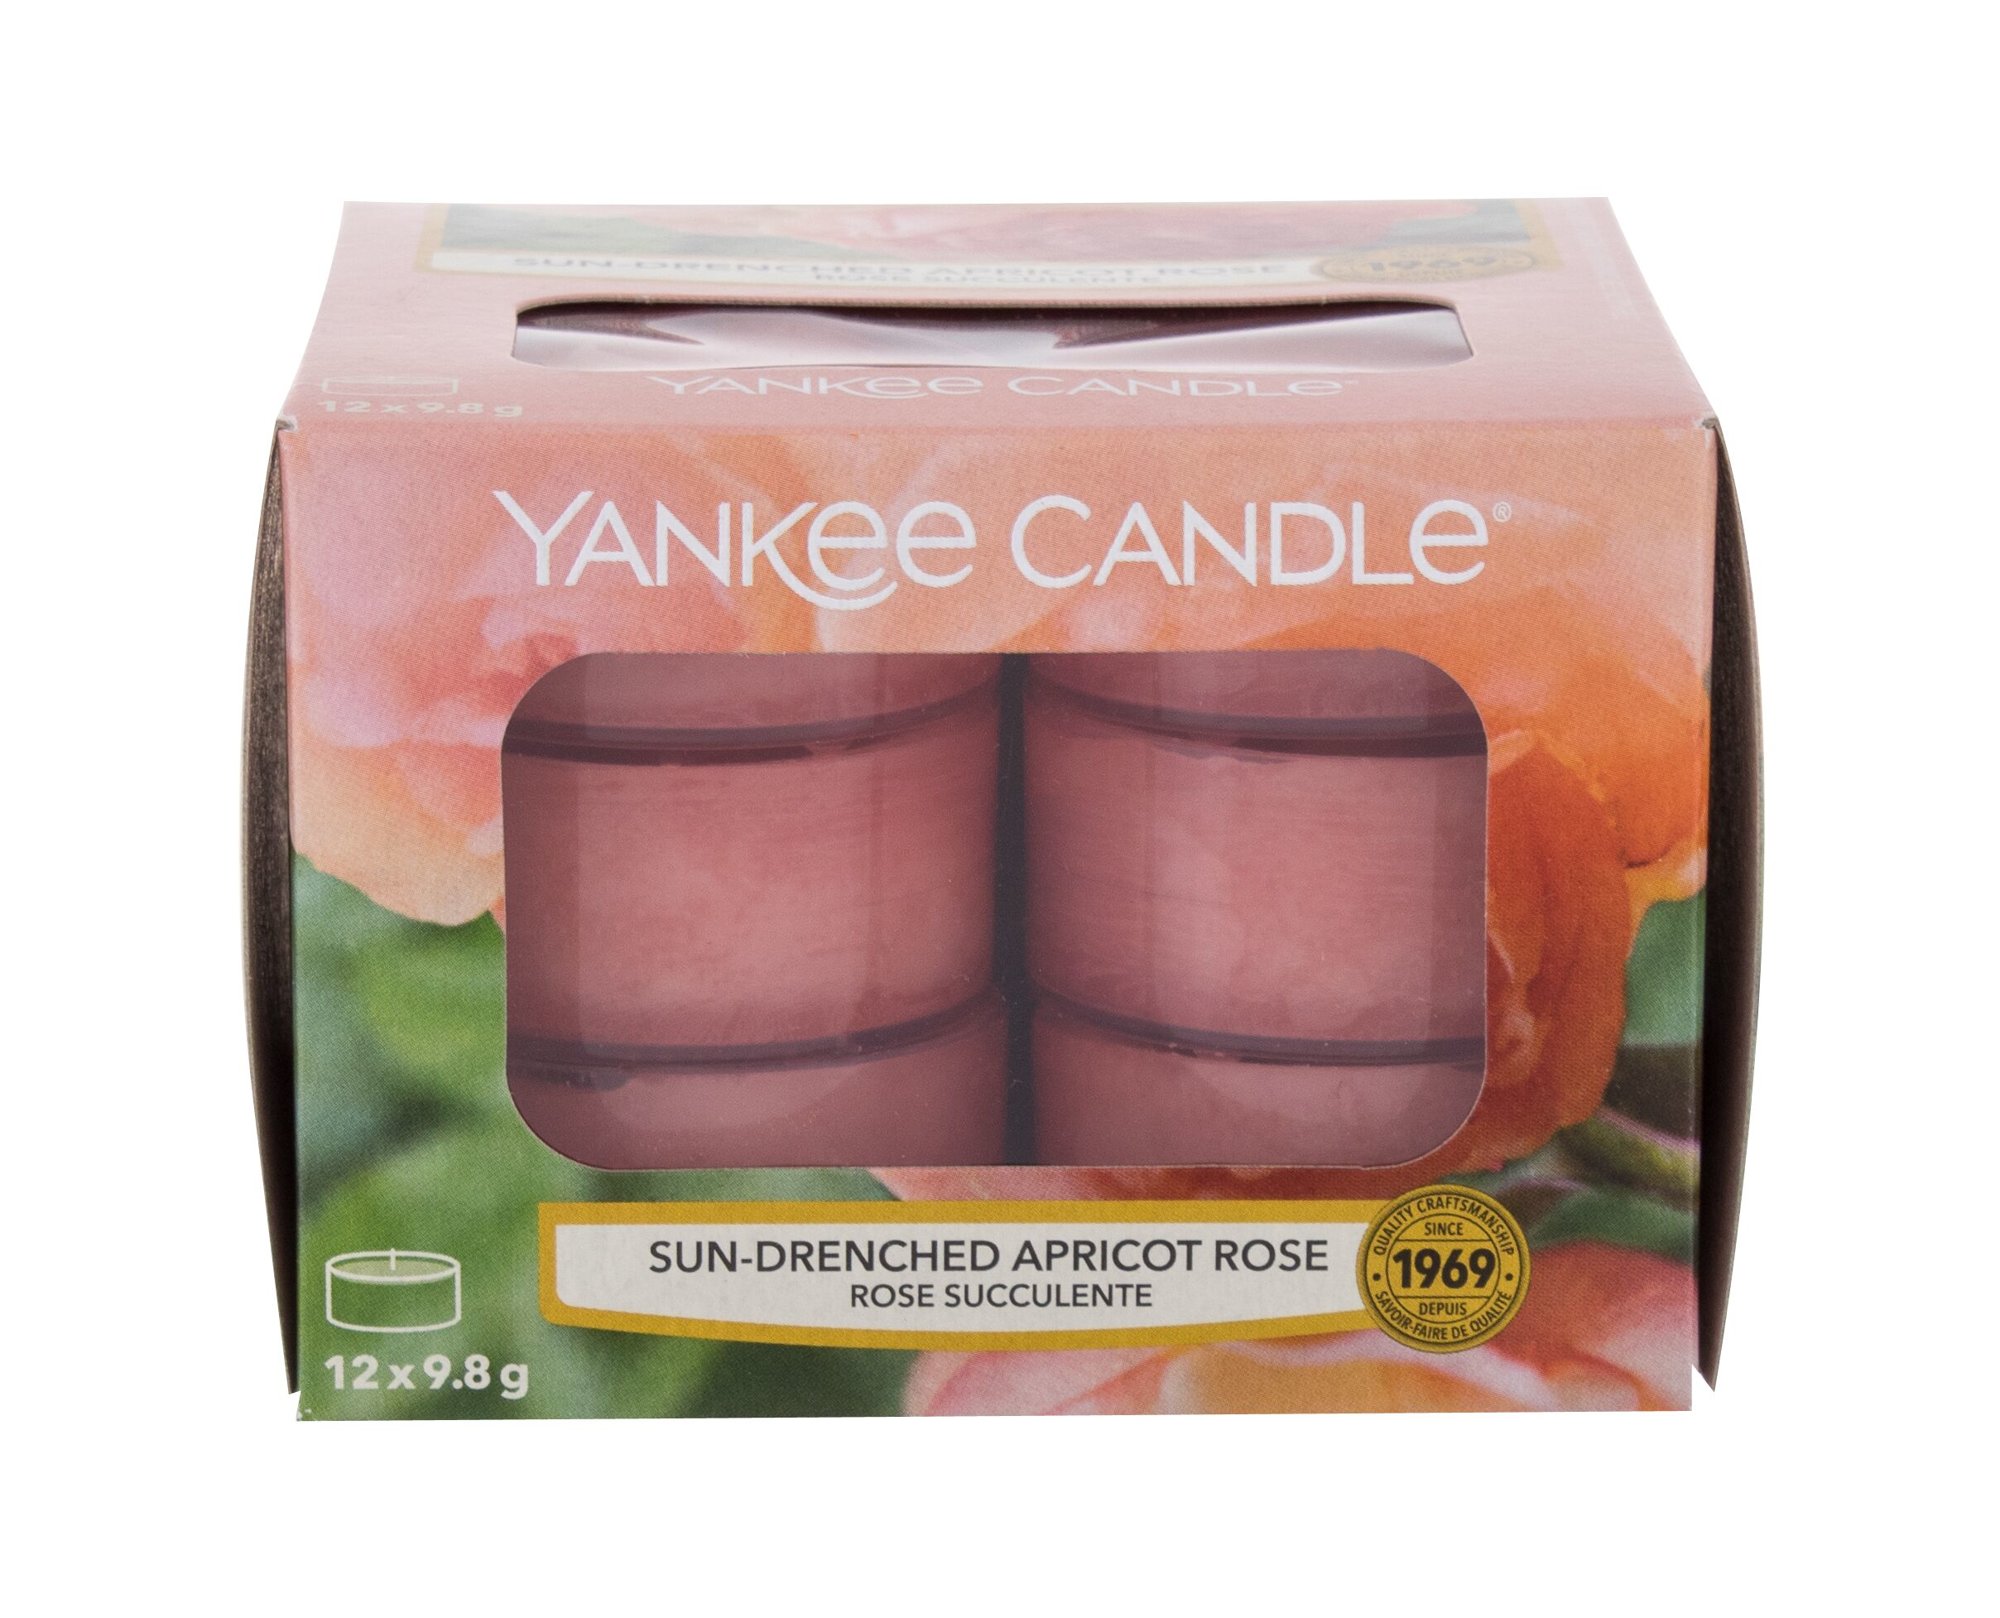 Yankee Candle Sun-Drenched Apricot Rose 117,6g Kvepalai Unisex Scented Candle